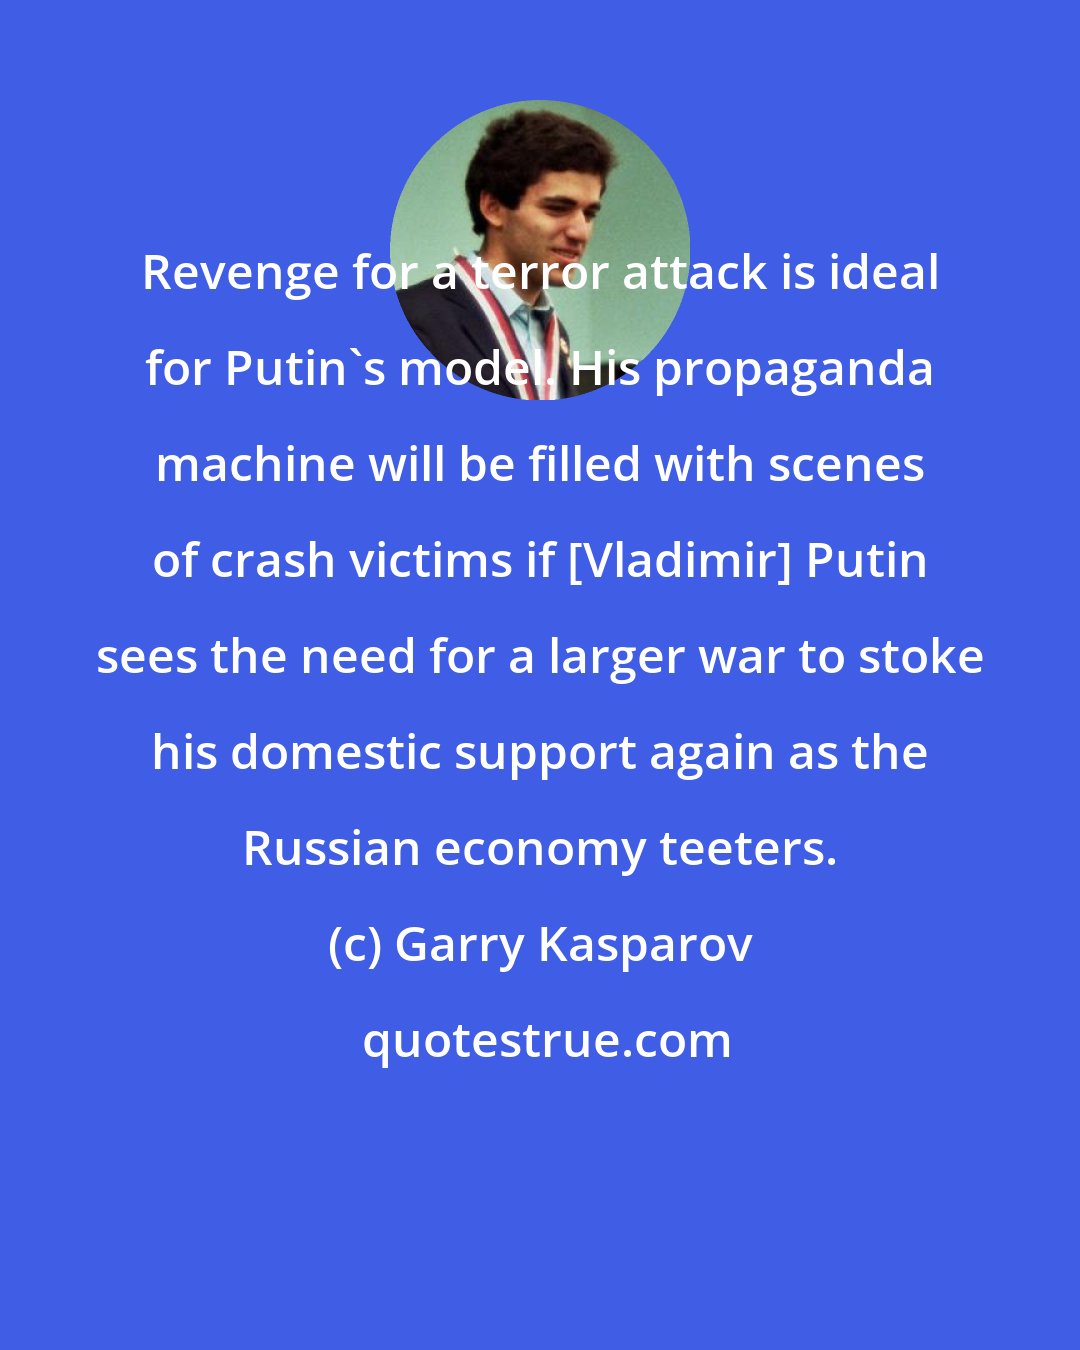 Garry Kasparov: Revenge for a terror attack is ideal for Putin's model. His propaganda machine will be filled with scenes of crash victims if [Vladimir] Putin sees the need for a larger war to stoke his domestic support again as the Russian economy teeters.